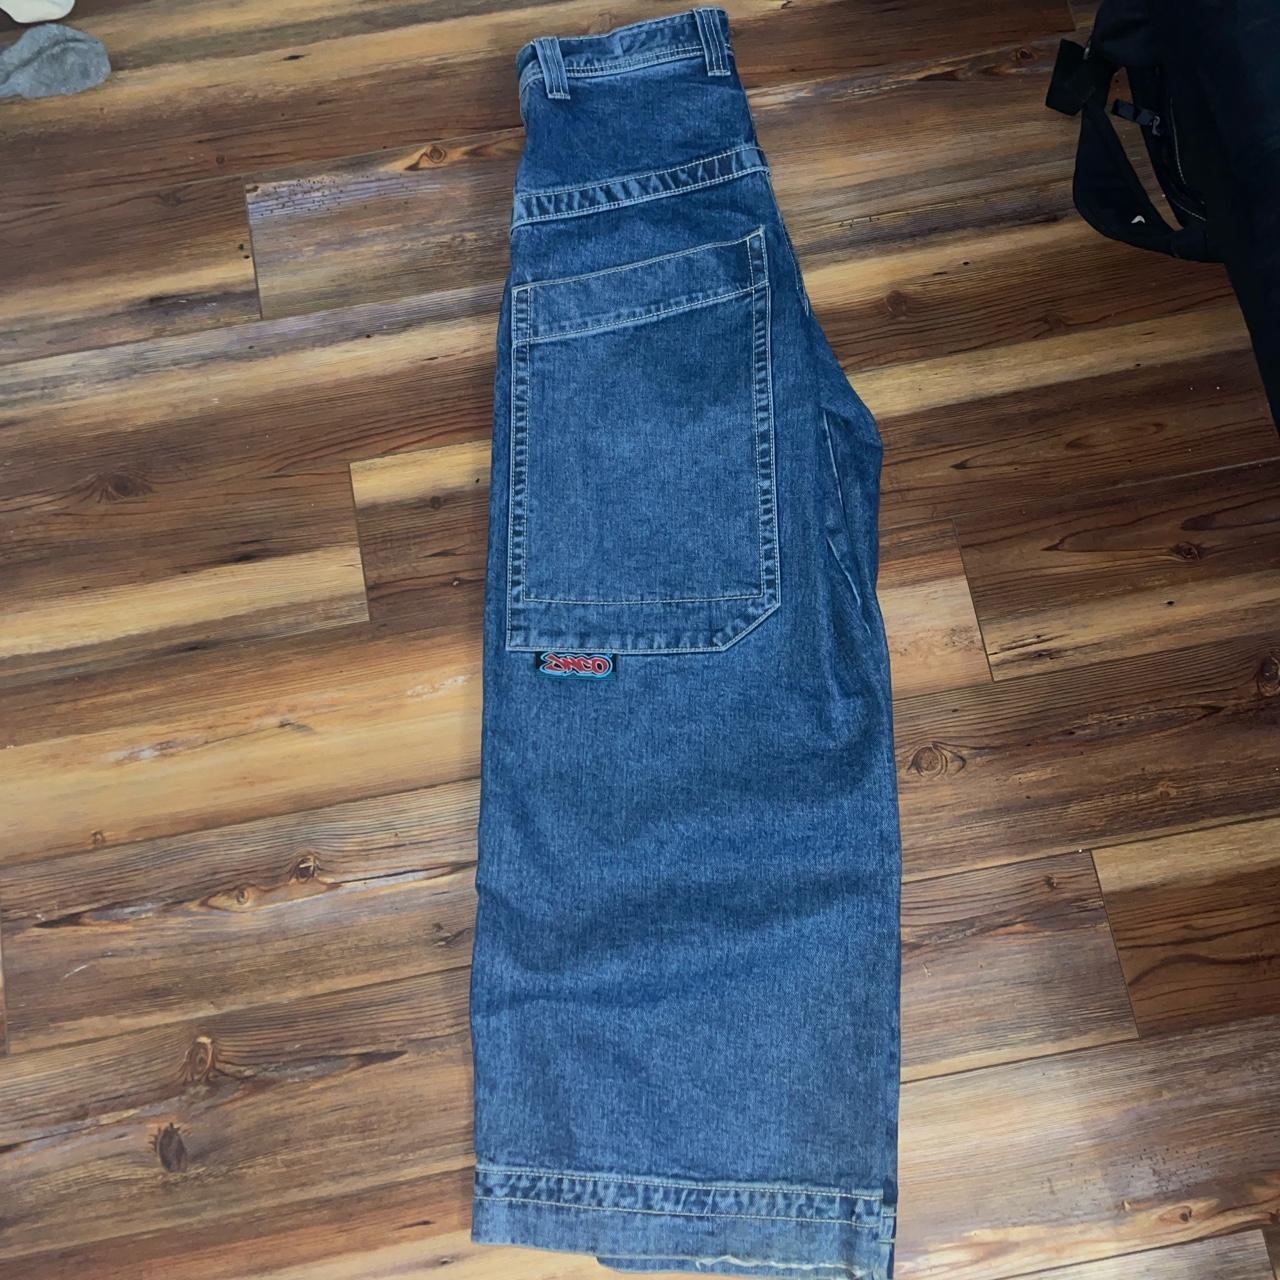 jnco rollin’ 26’ leg opening, very cool pair i would... - Depop